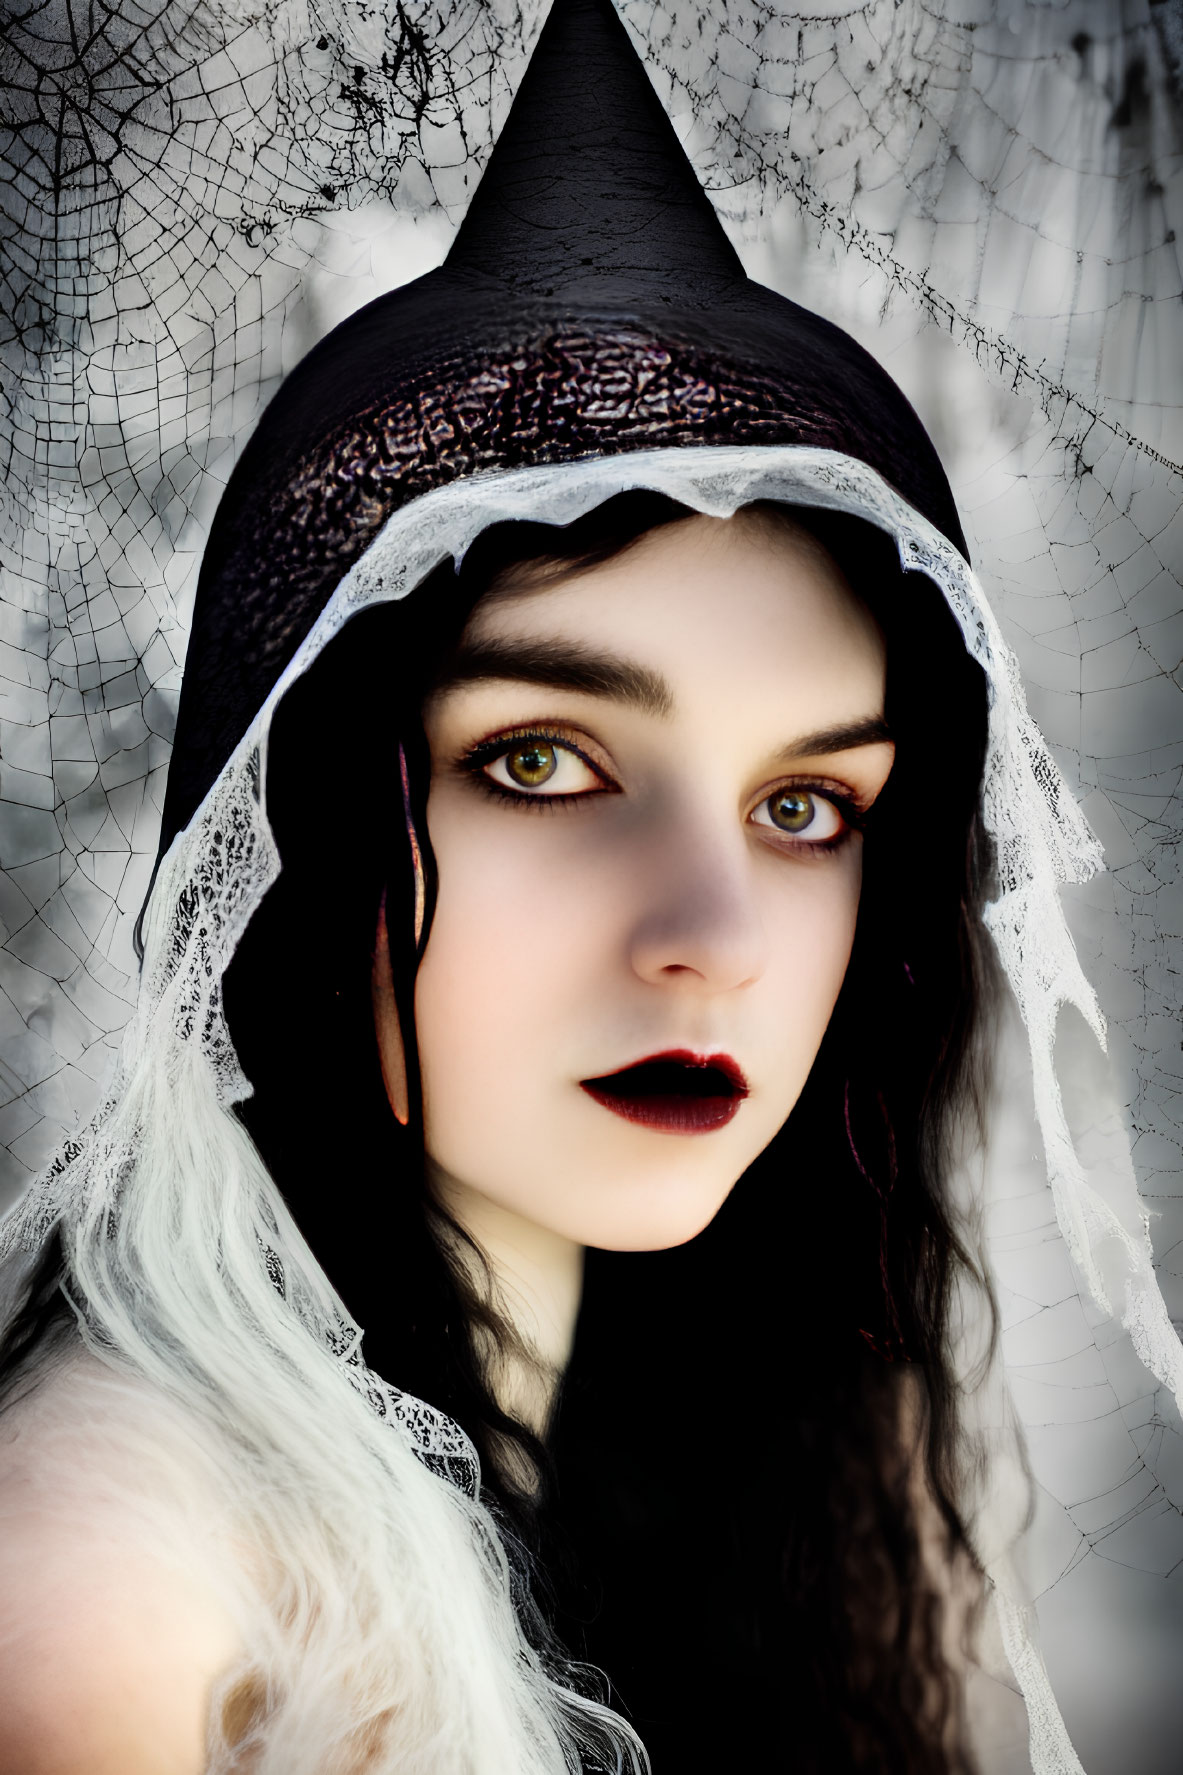 Person with Striking Green Eyes in Gothic Black and White Hooded Garment